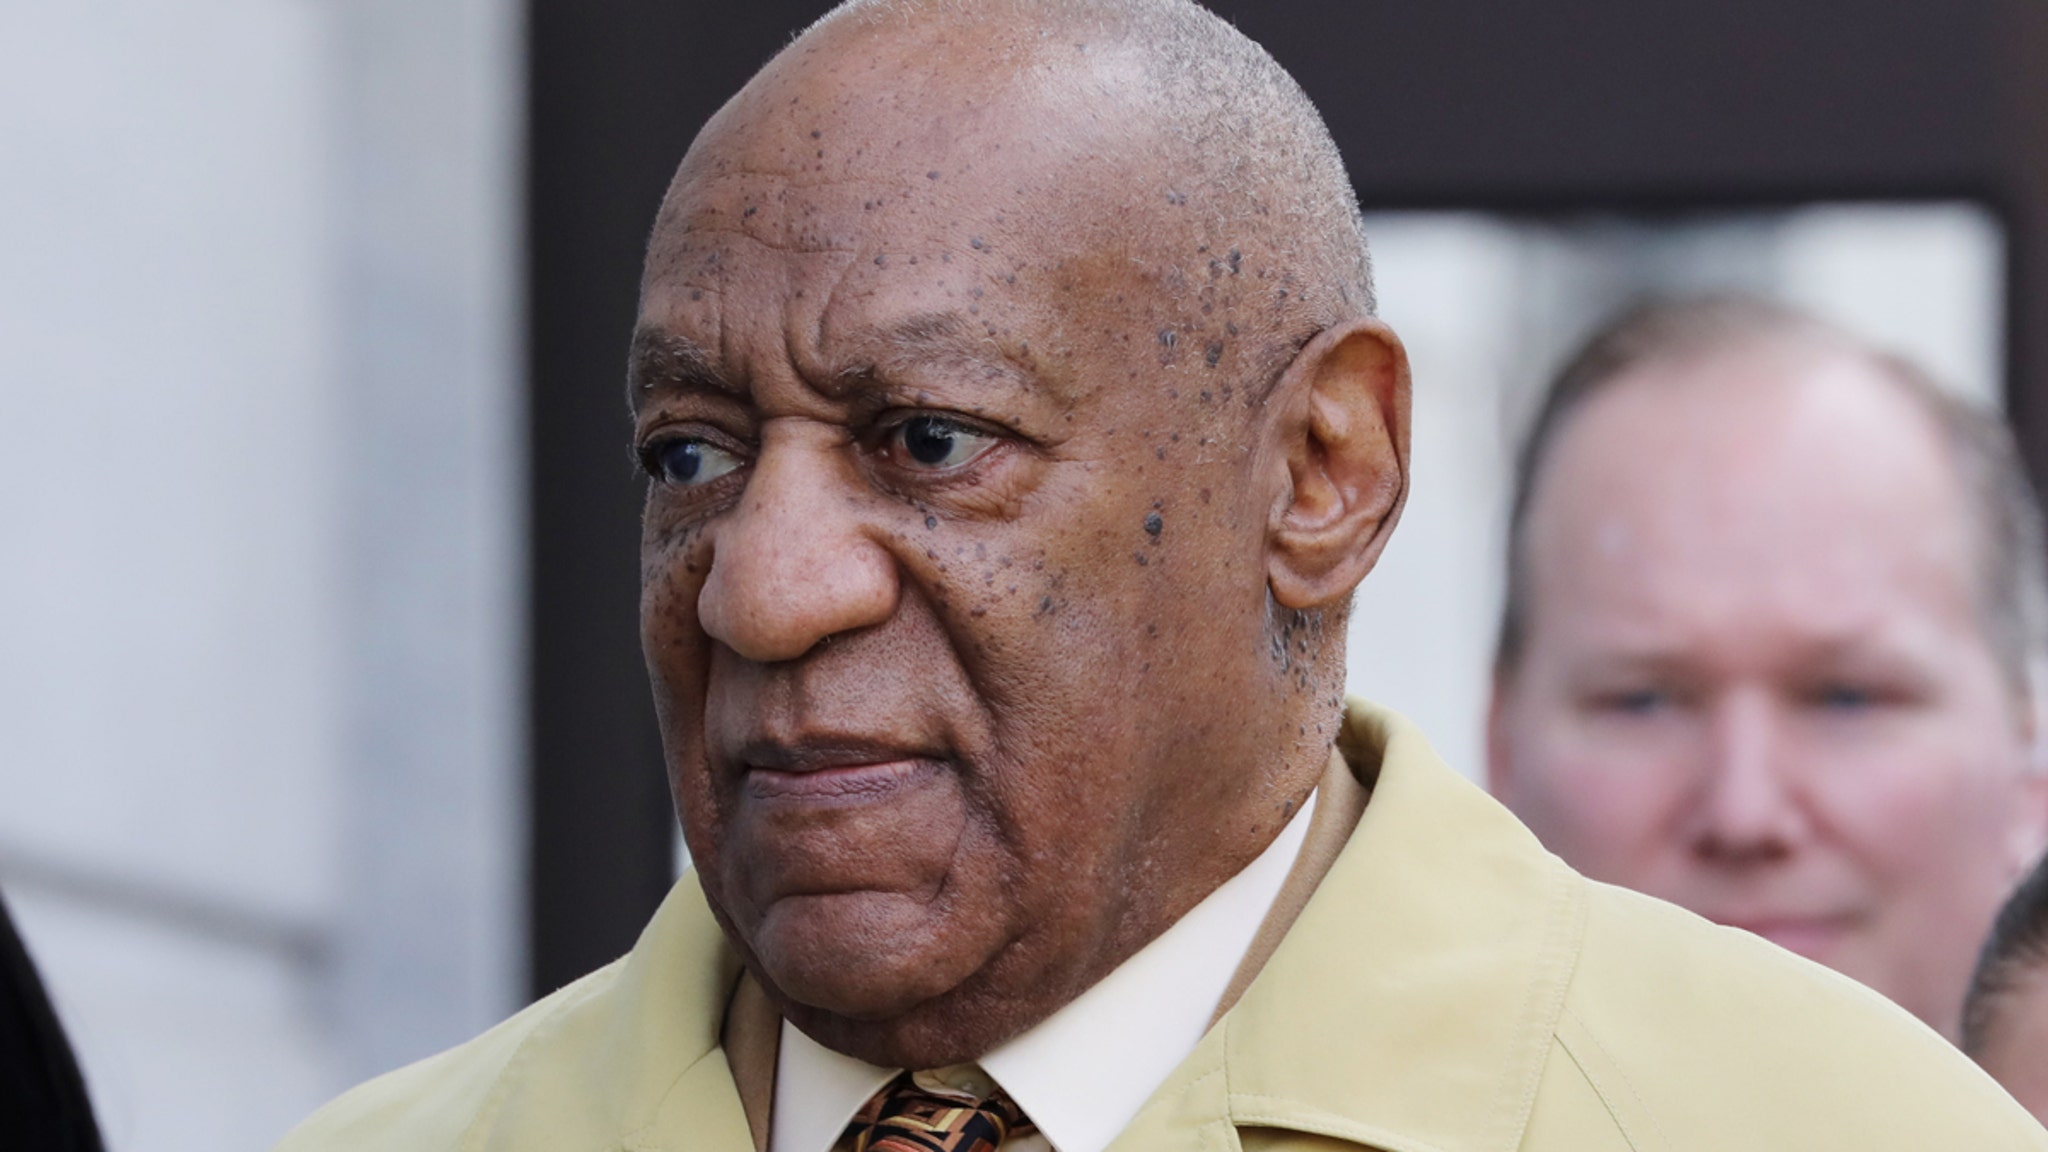 Bill Cosby Found Liable of Sexually Assaulting 16-Year-Old Girl